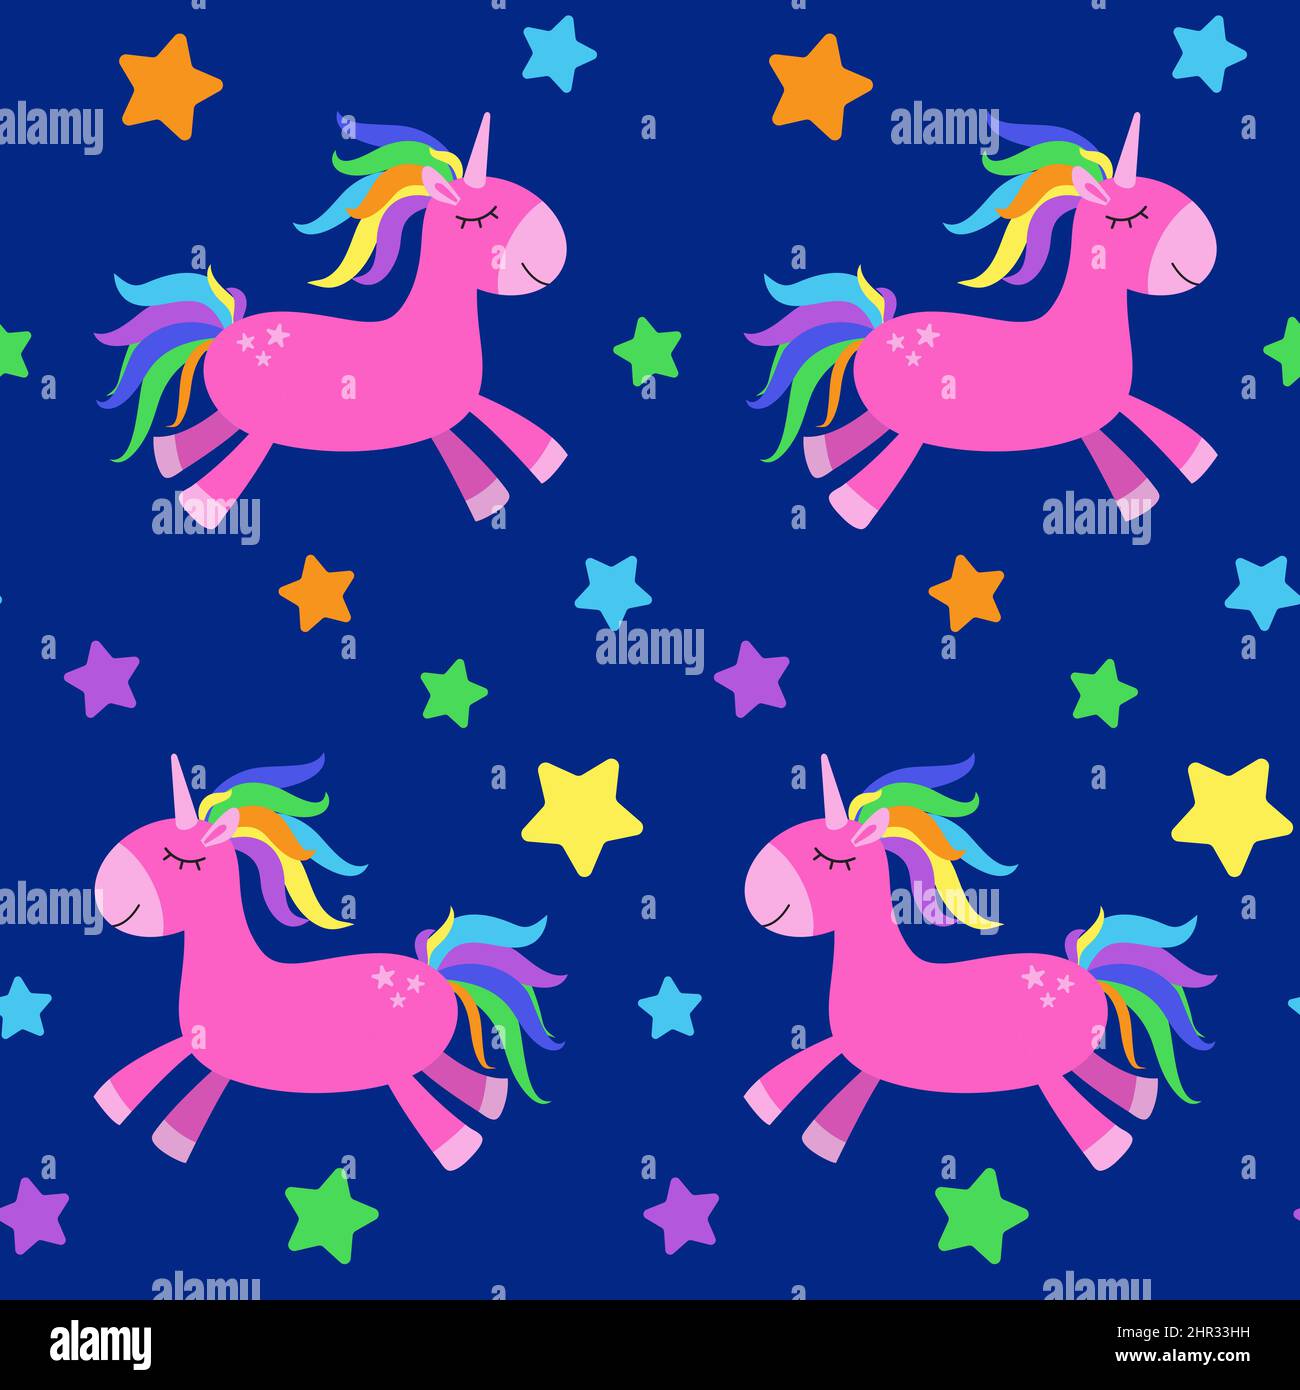 Magical baby Stock Vector Images - Alamy